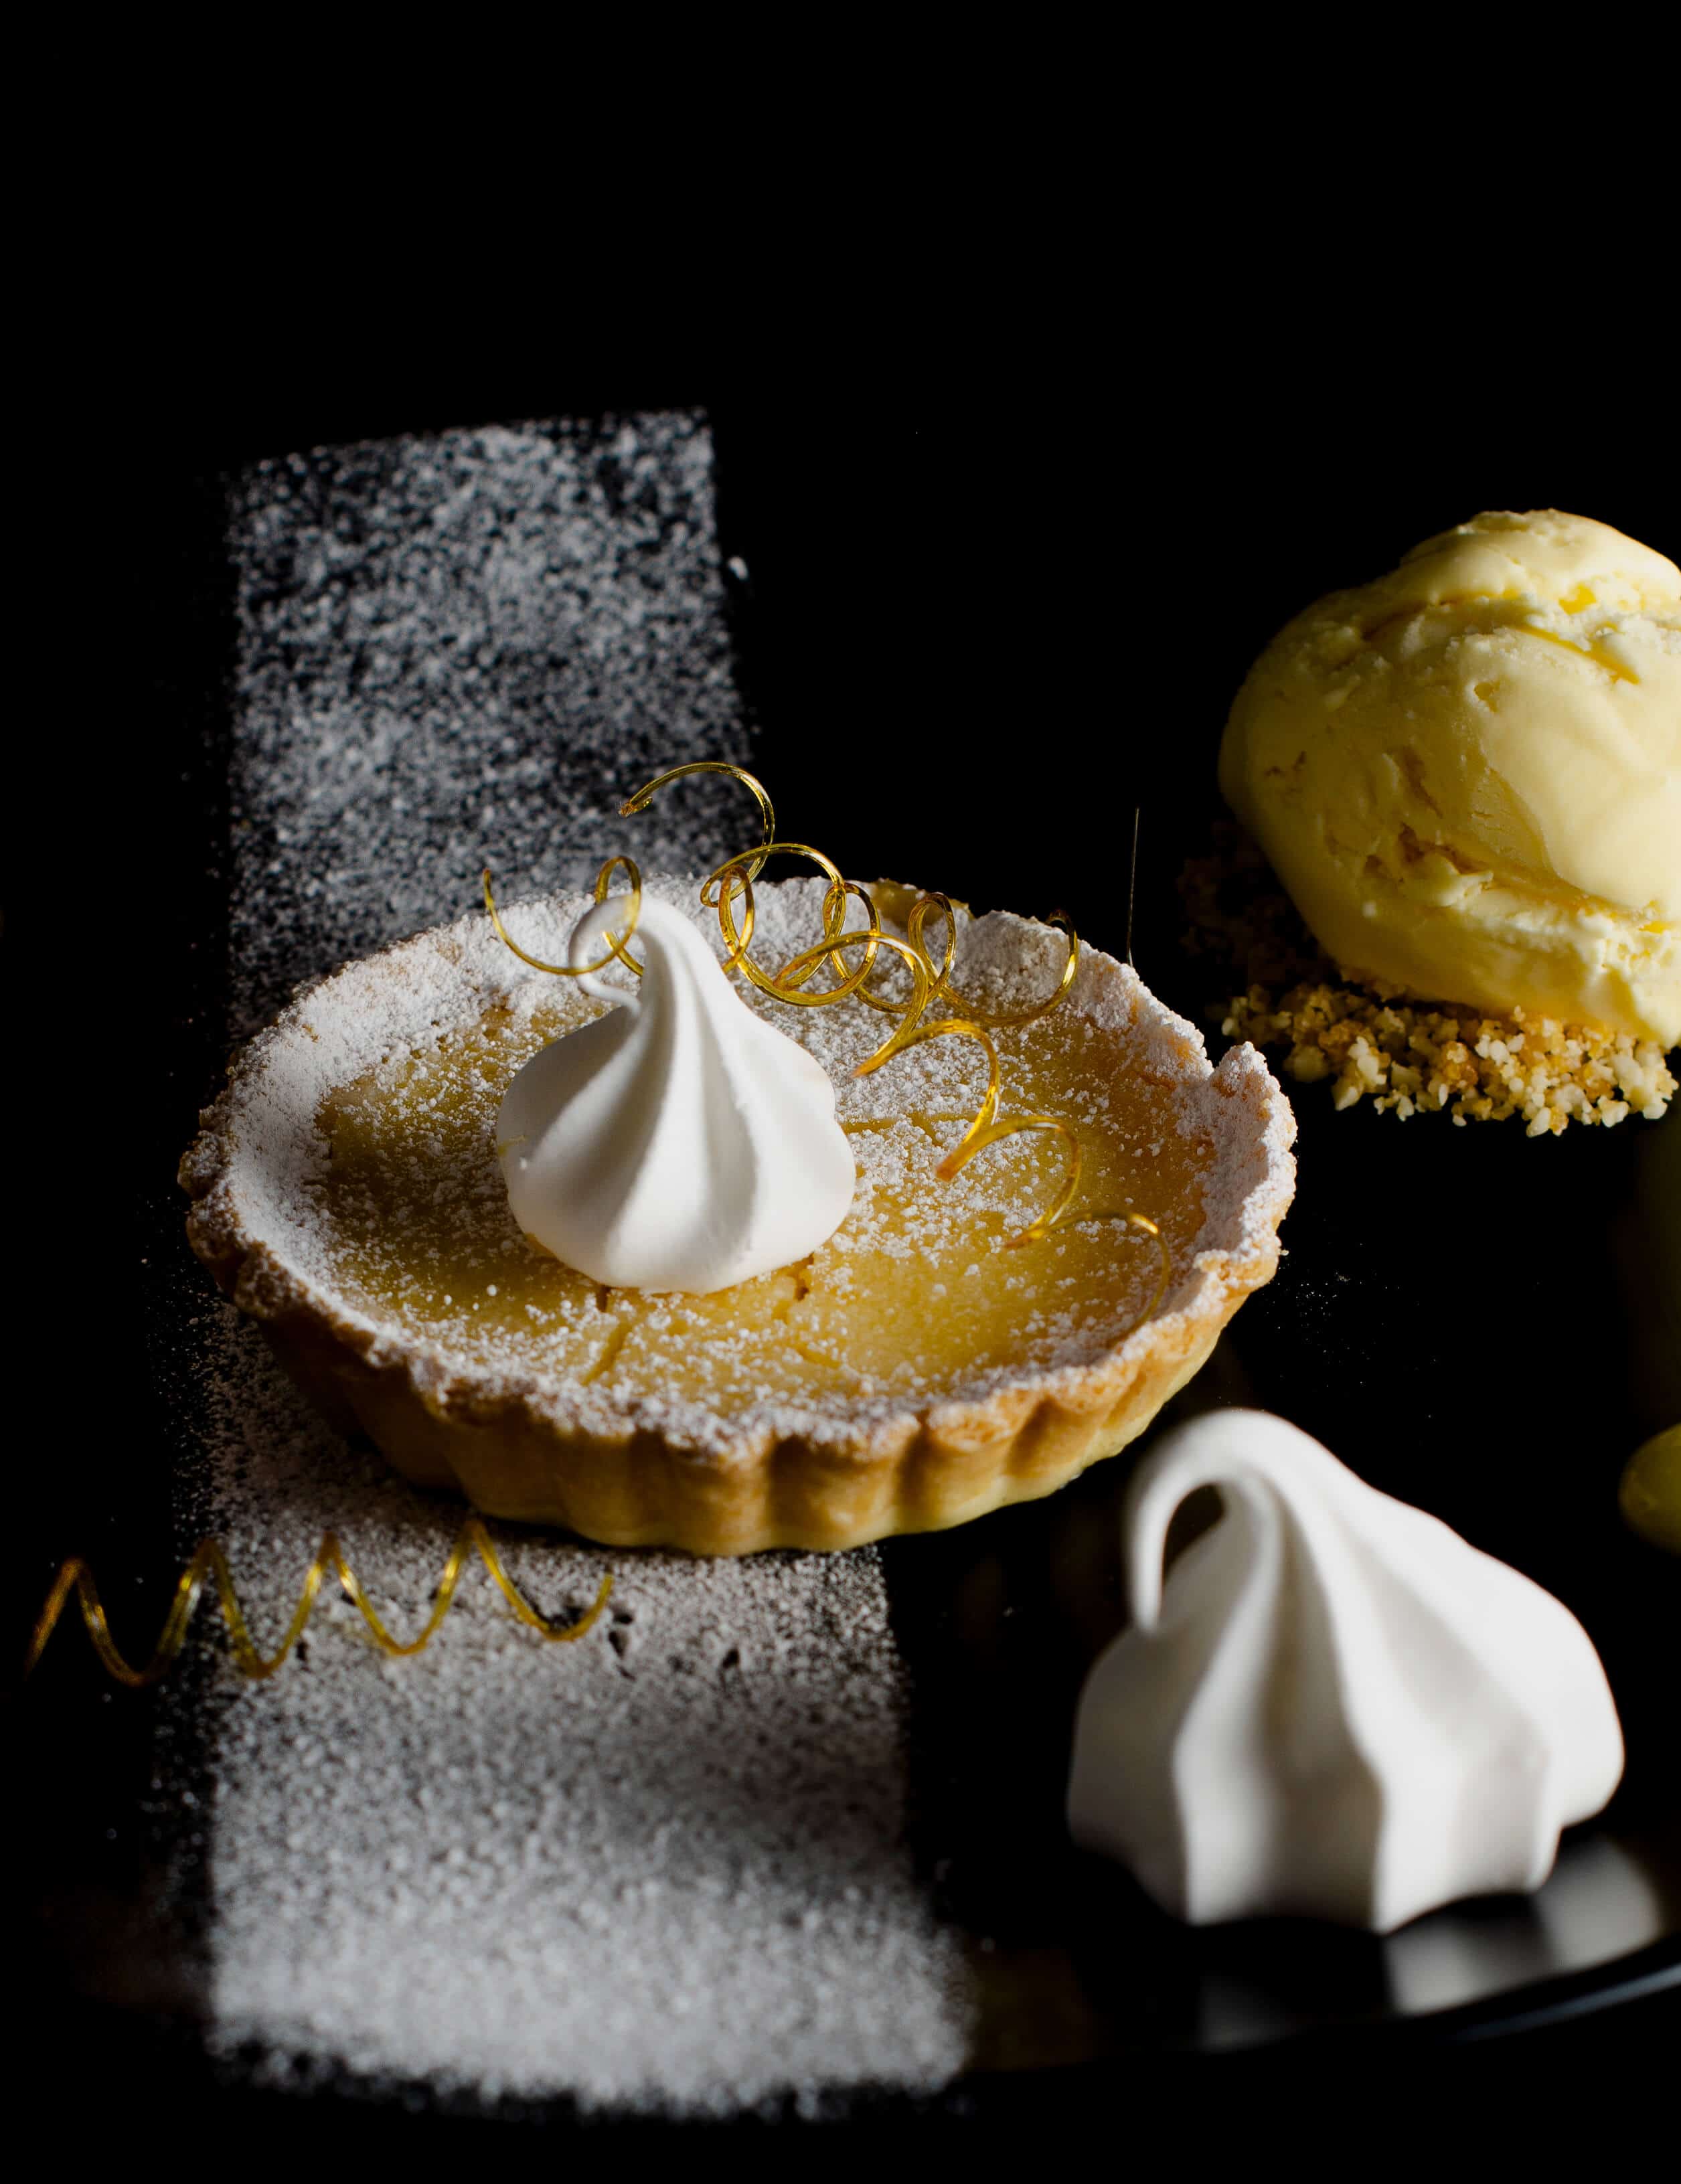 lemon tart with limoncello ice cream and sugar spirals on a black plate in a dark background